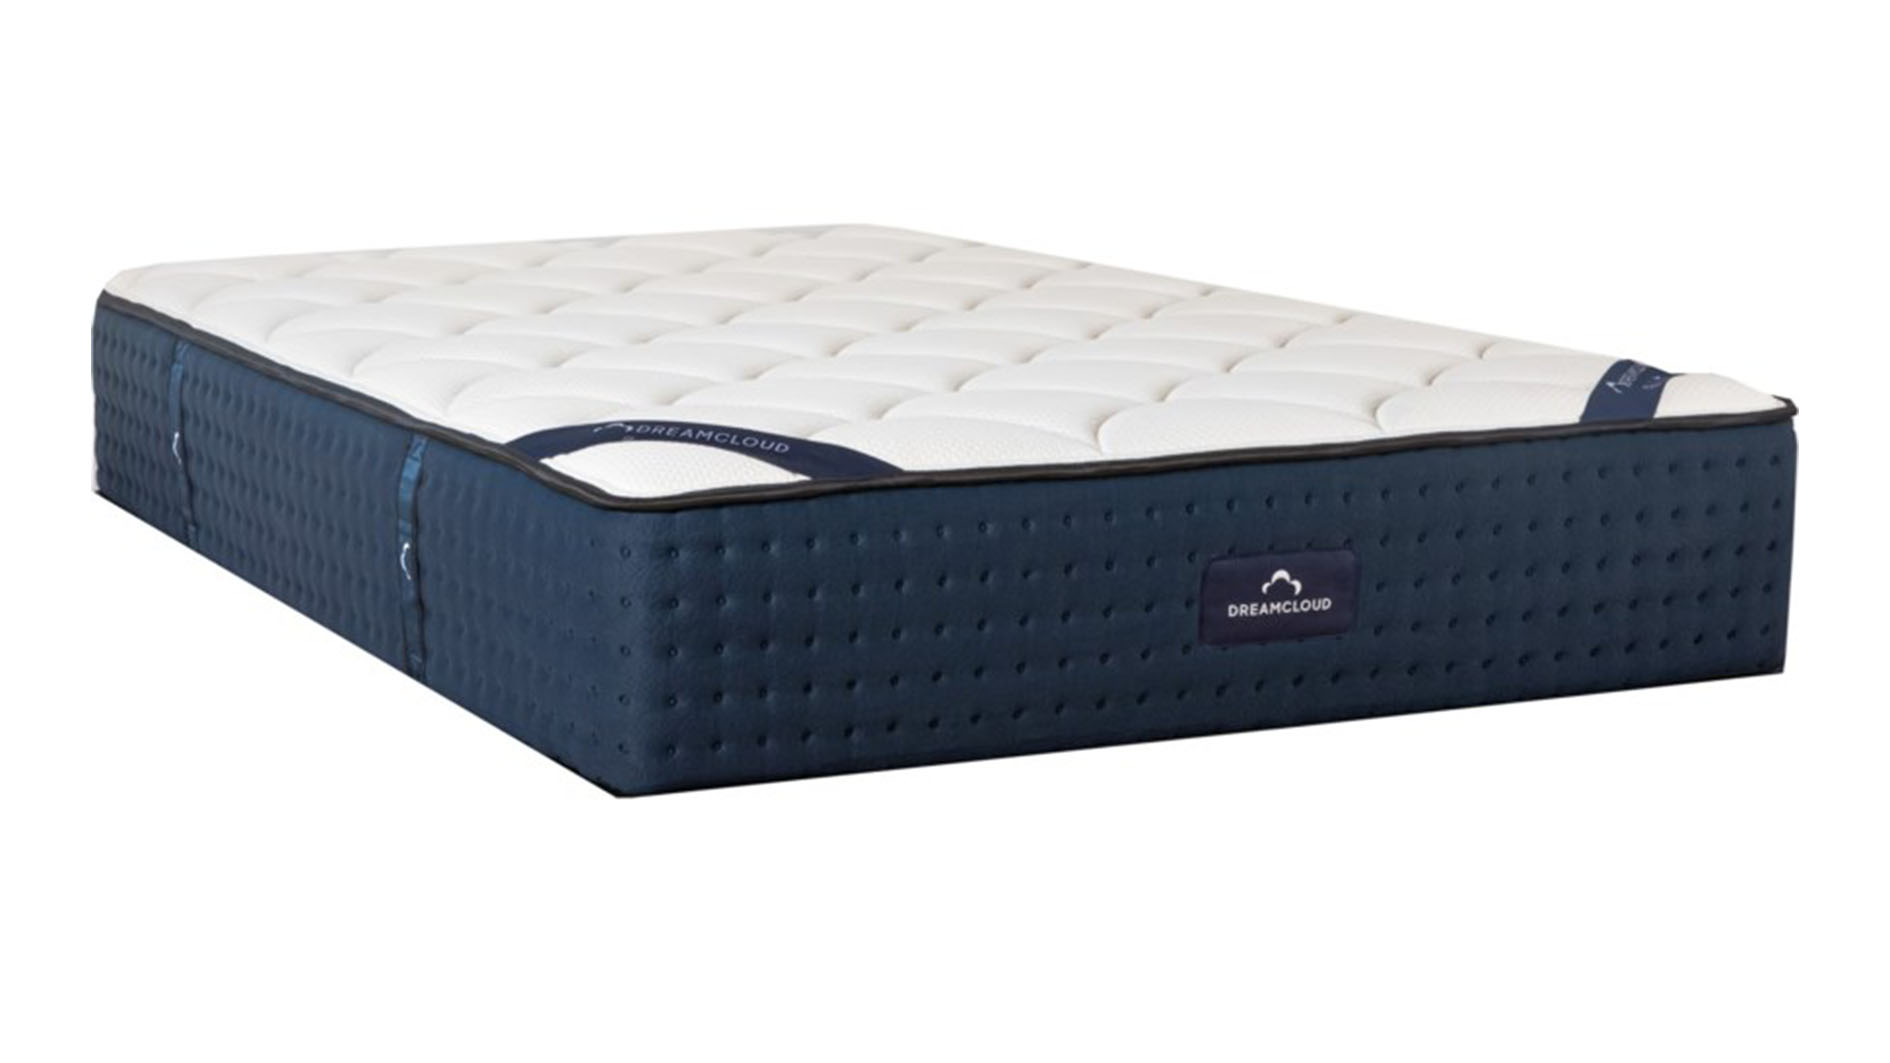 Memory foam vs hybrid mattresses: Image shows the DreamCloud Luxury Hybrid with navy base and white top